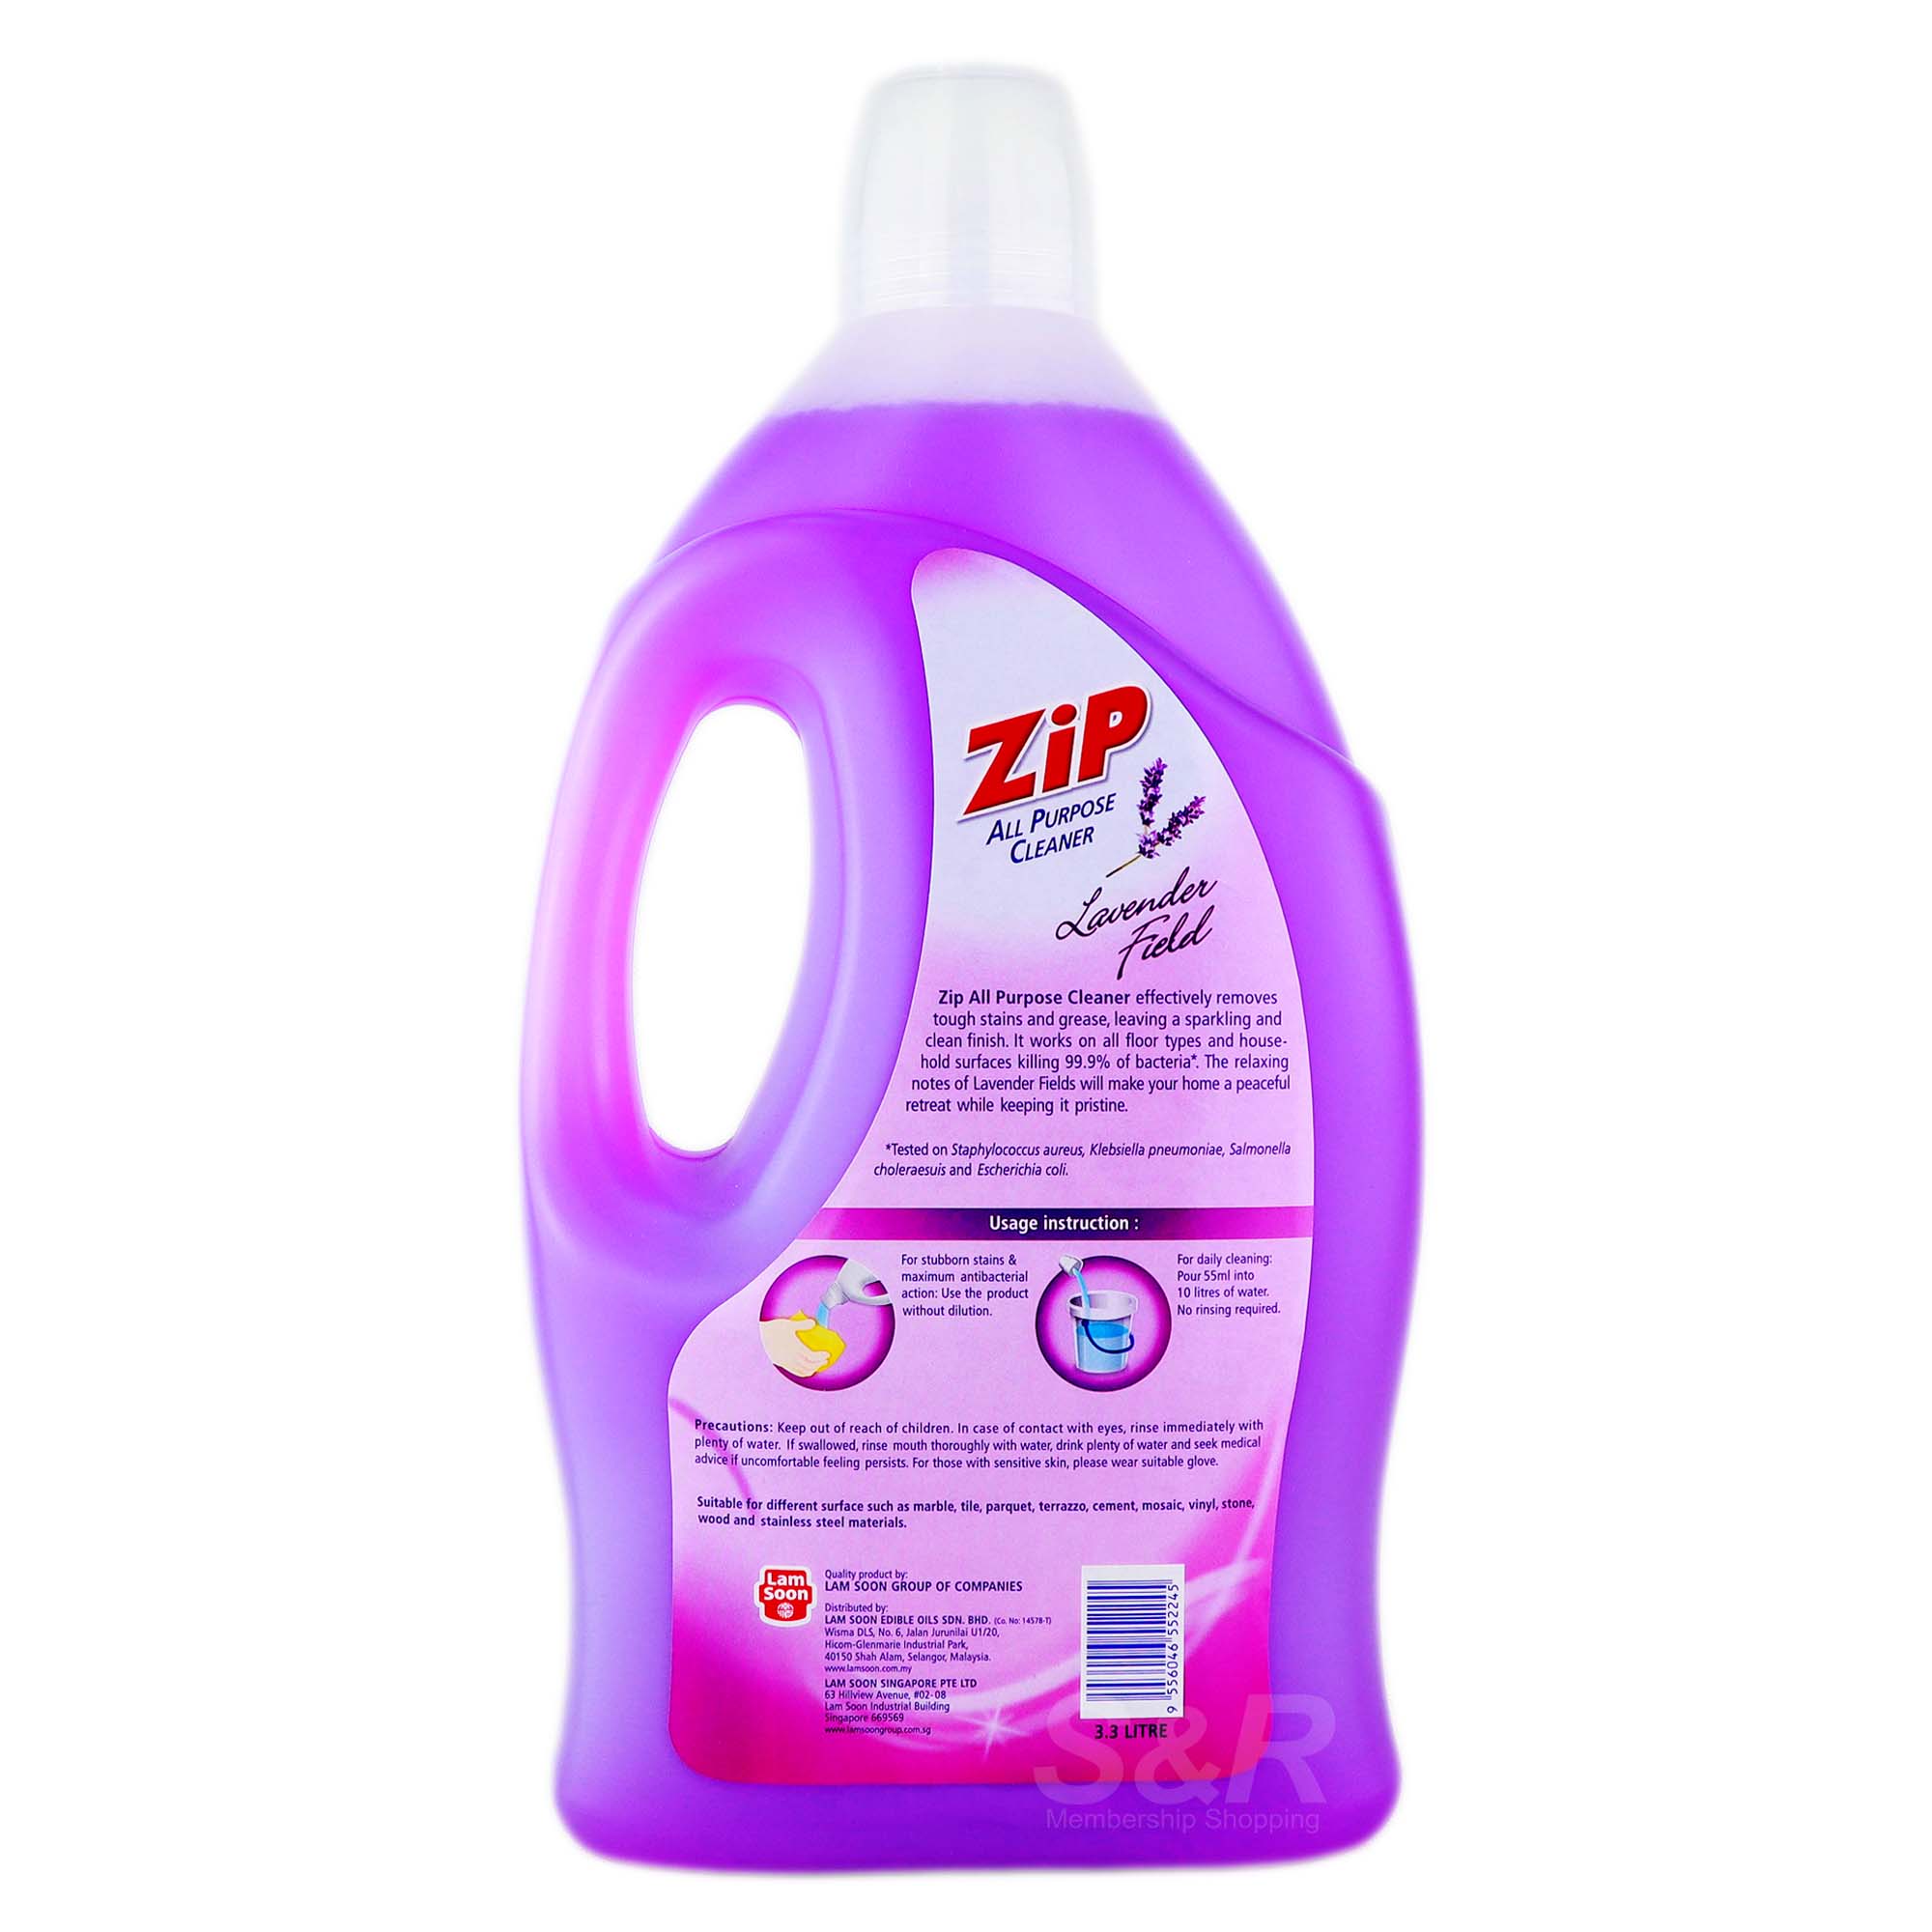 All-purpose cleaner